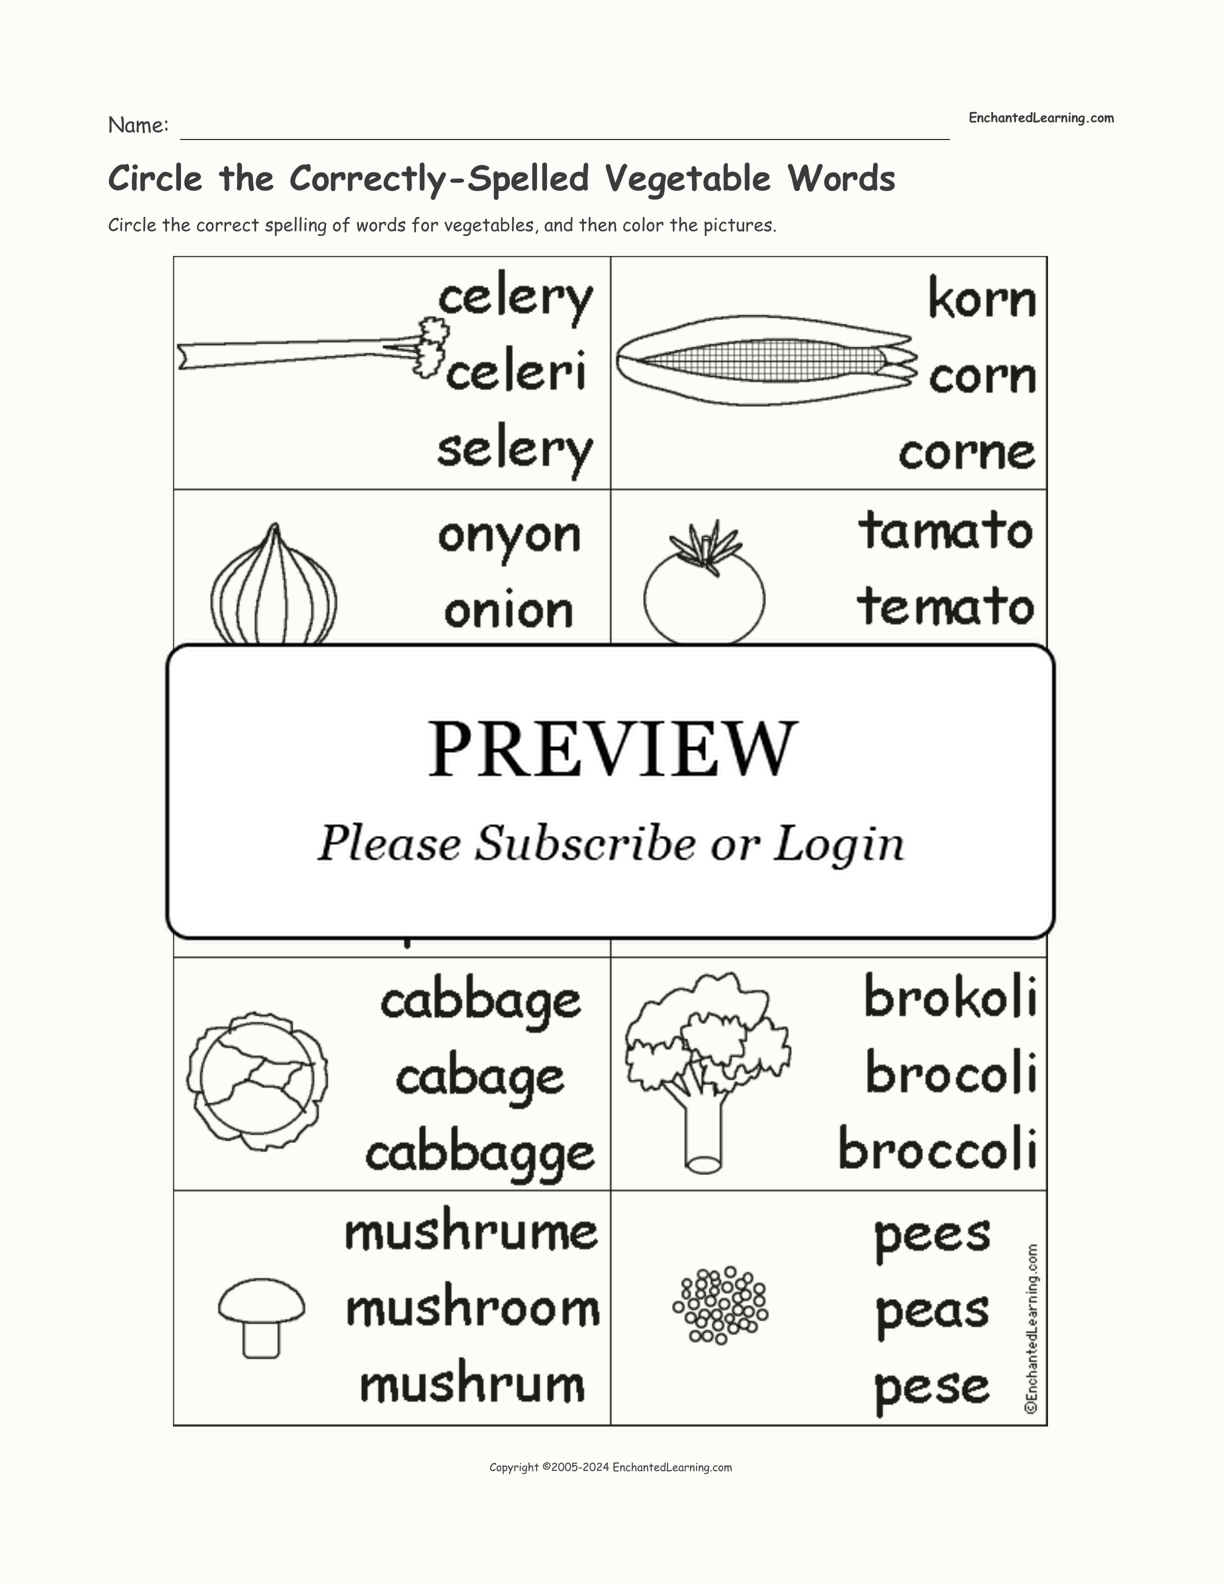 Circle the Correctly-Spelled Vegetable Words interactive worksheet page 1